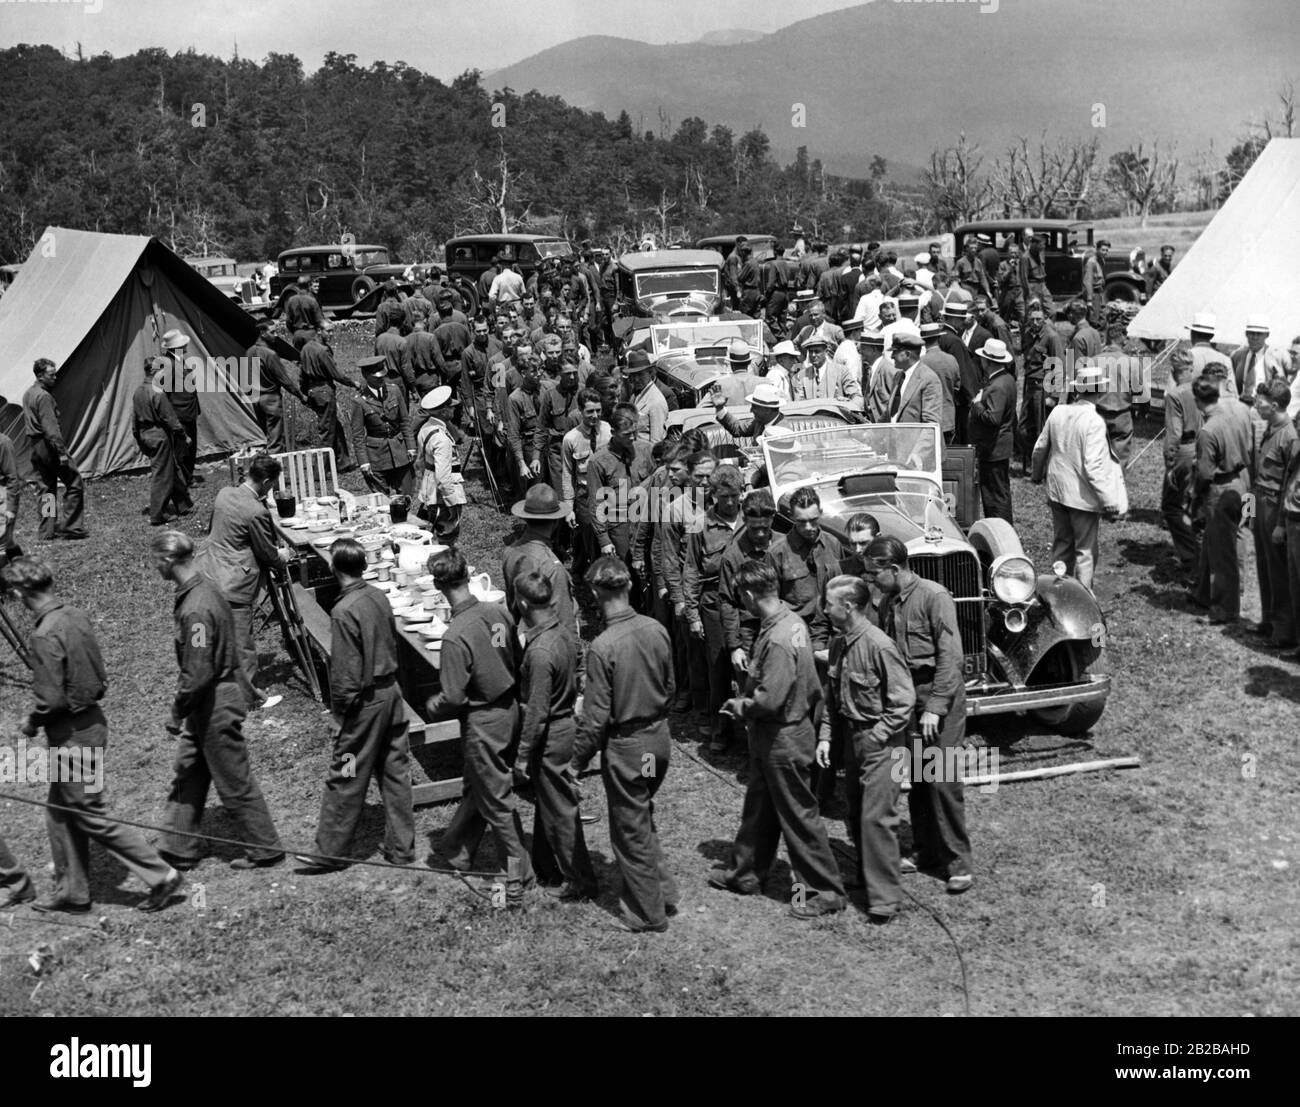 President Franklin Roosevelt greets workers at a Civilian Conservation Corps (A work relief program) camp. Stock Photo